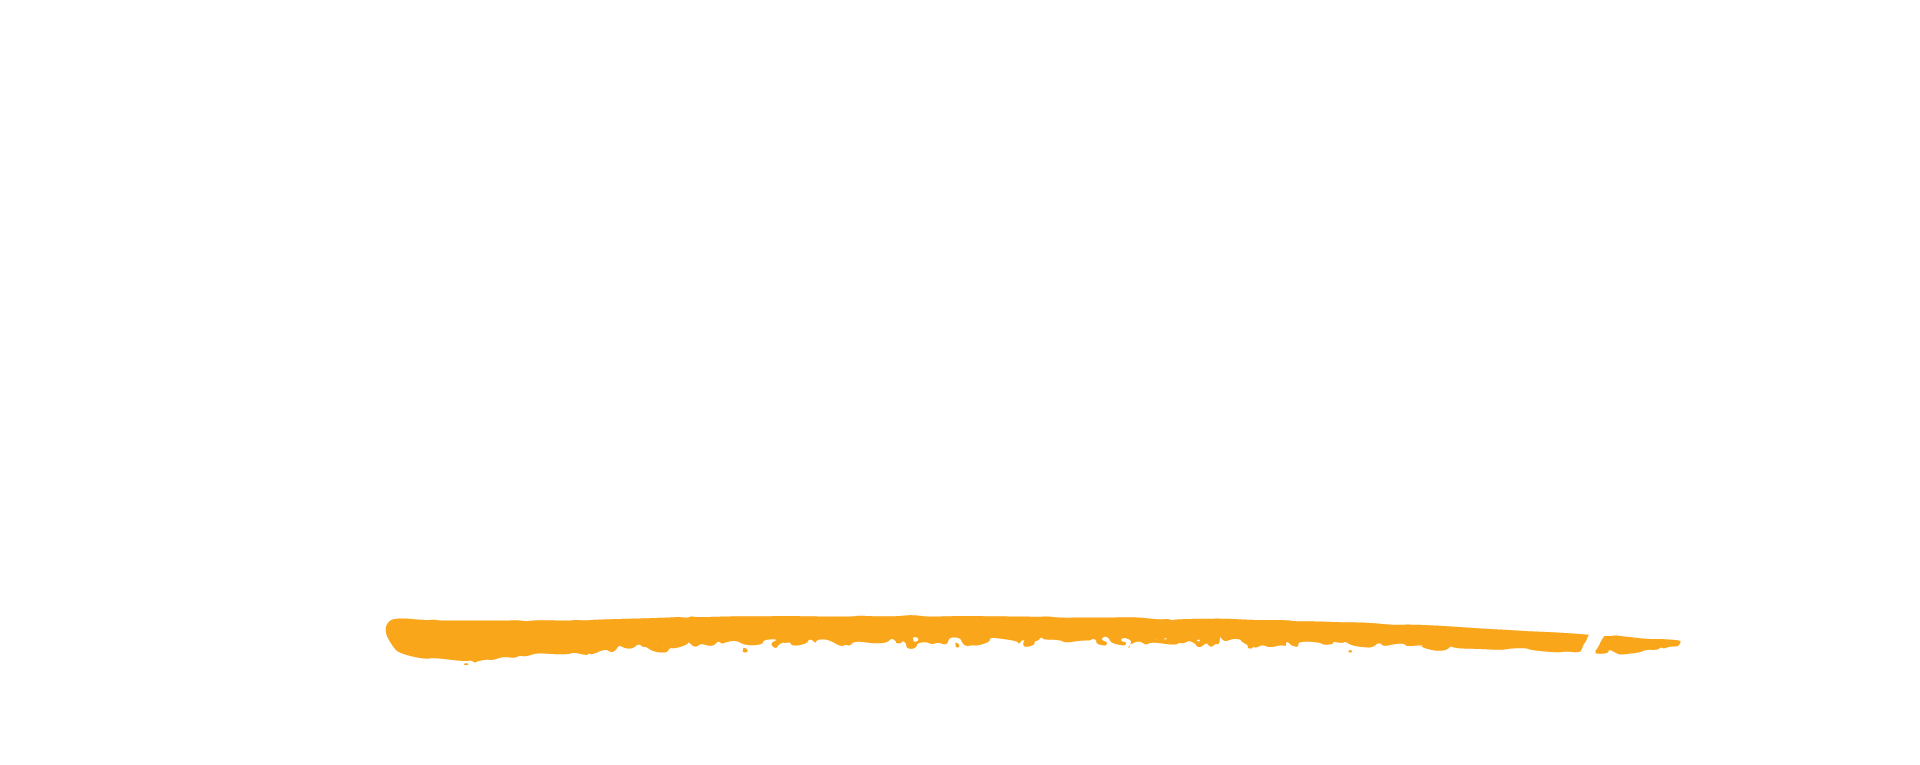 Homecoming Logo and Text